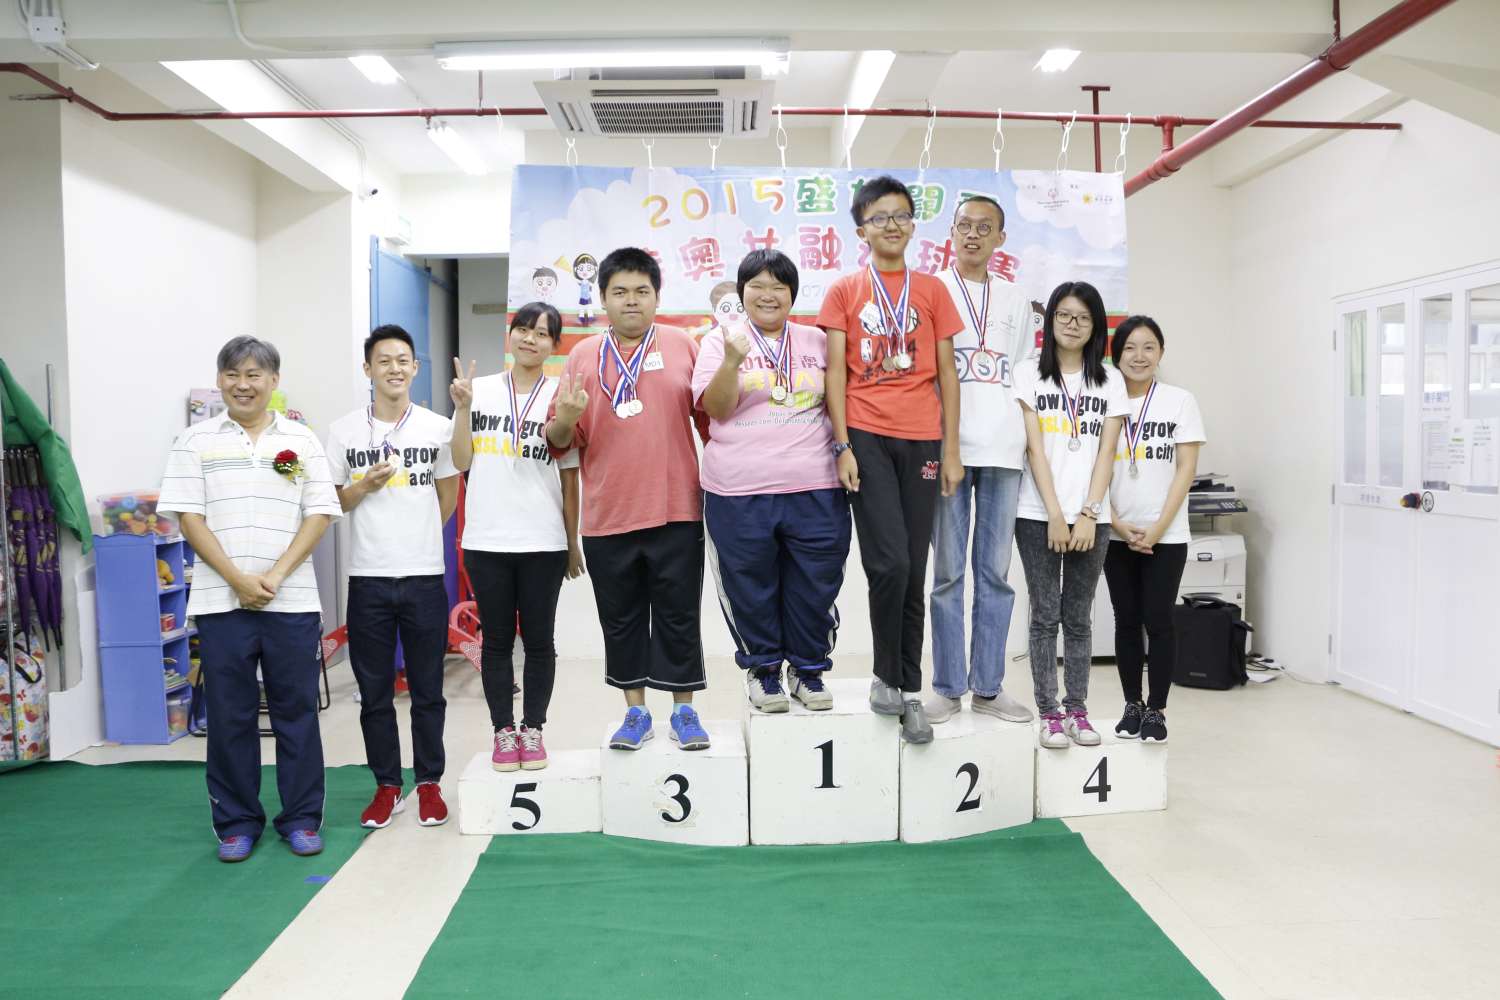 CESL Asia & MSO Bocce Game Event: Promoting Social Integration of Able-bodied and Disabled Persons